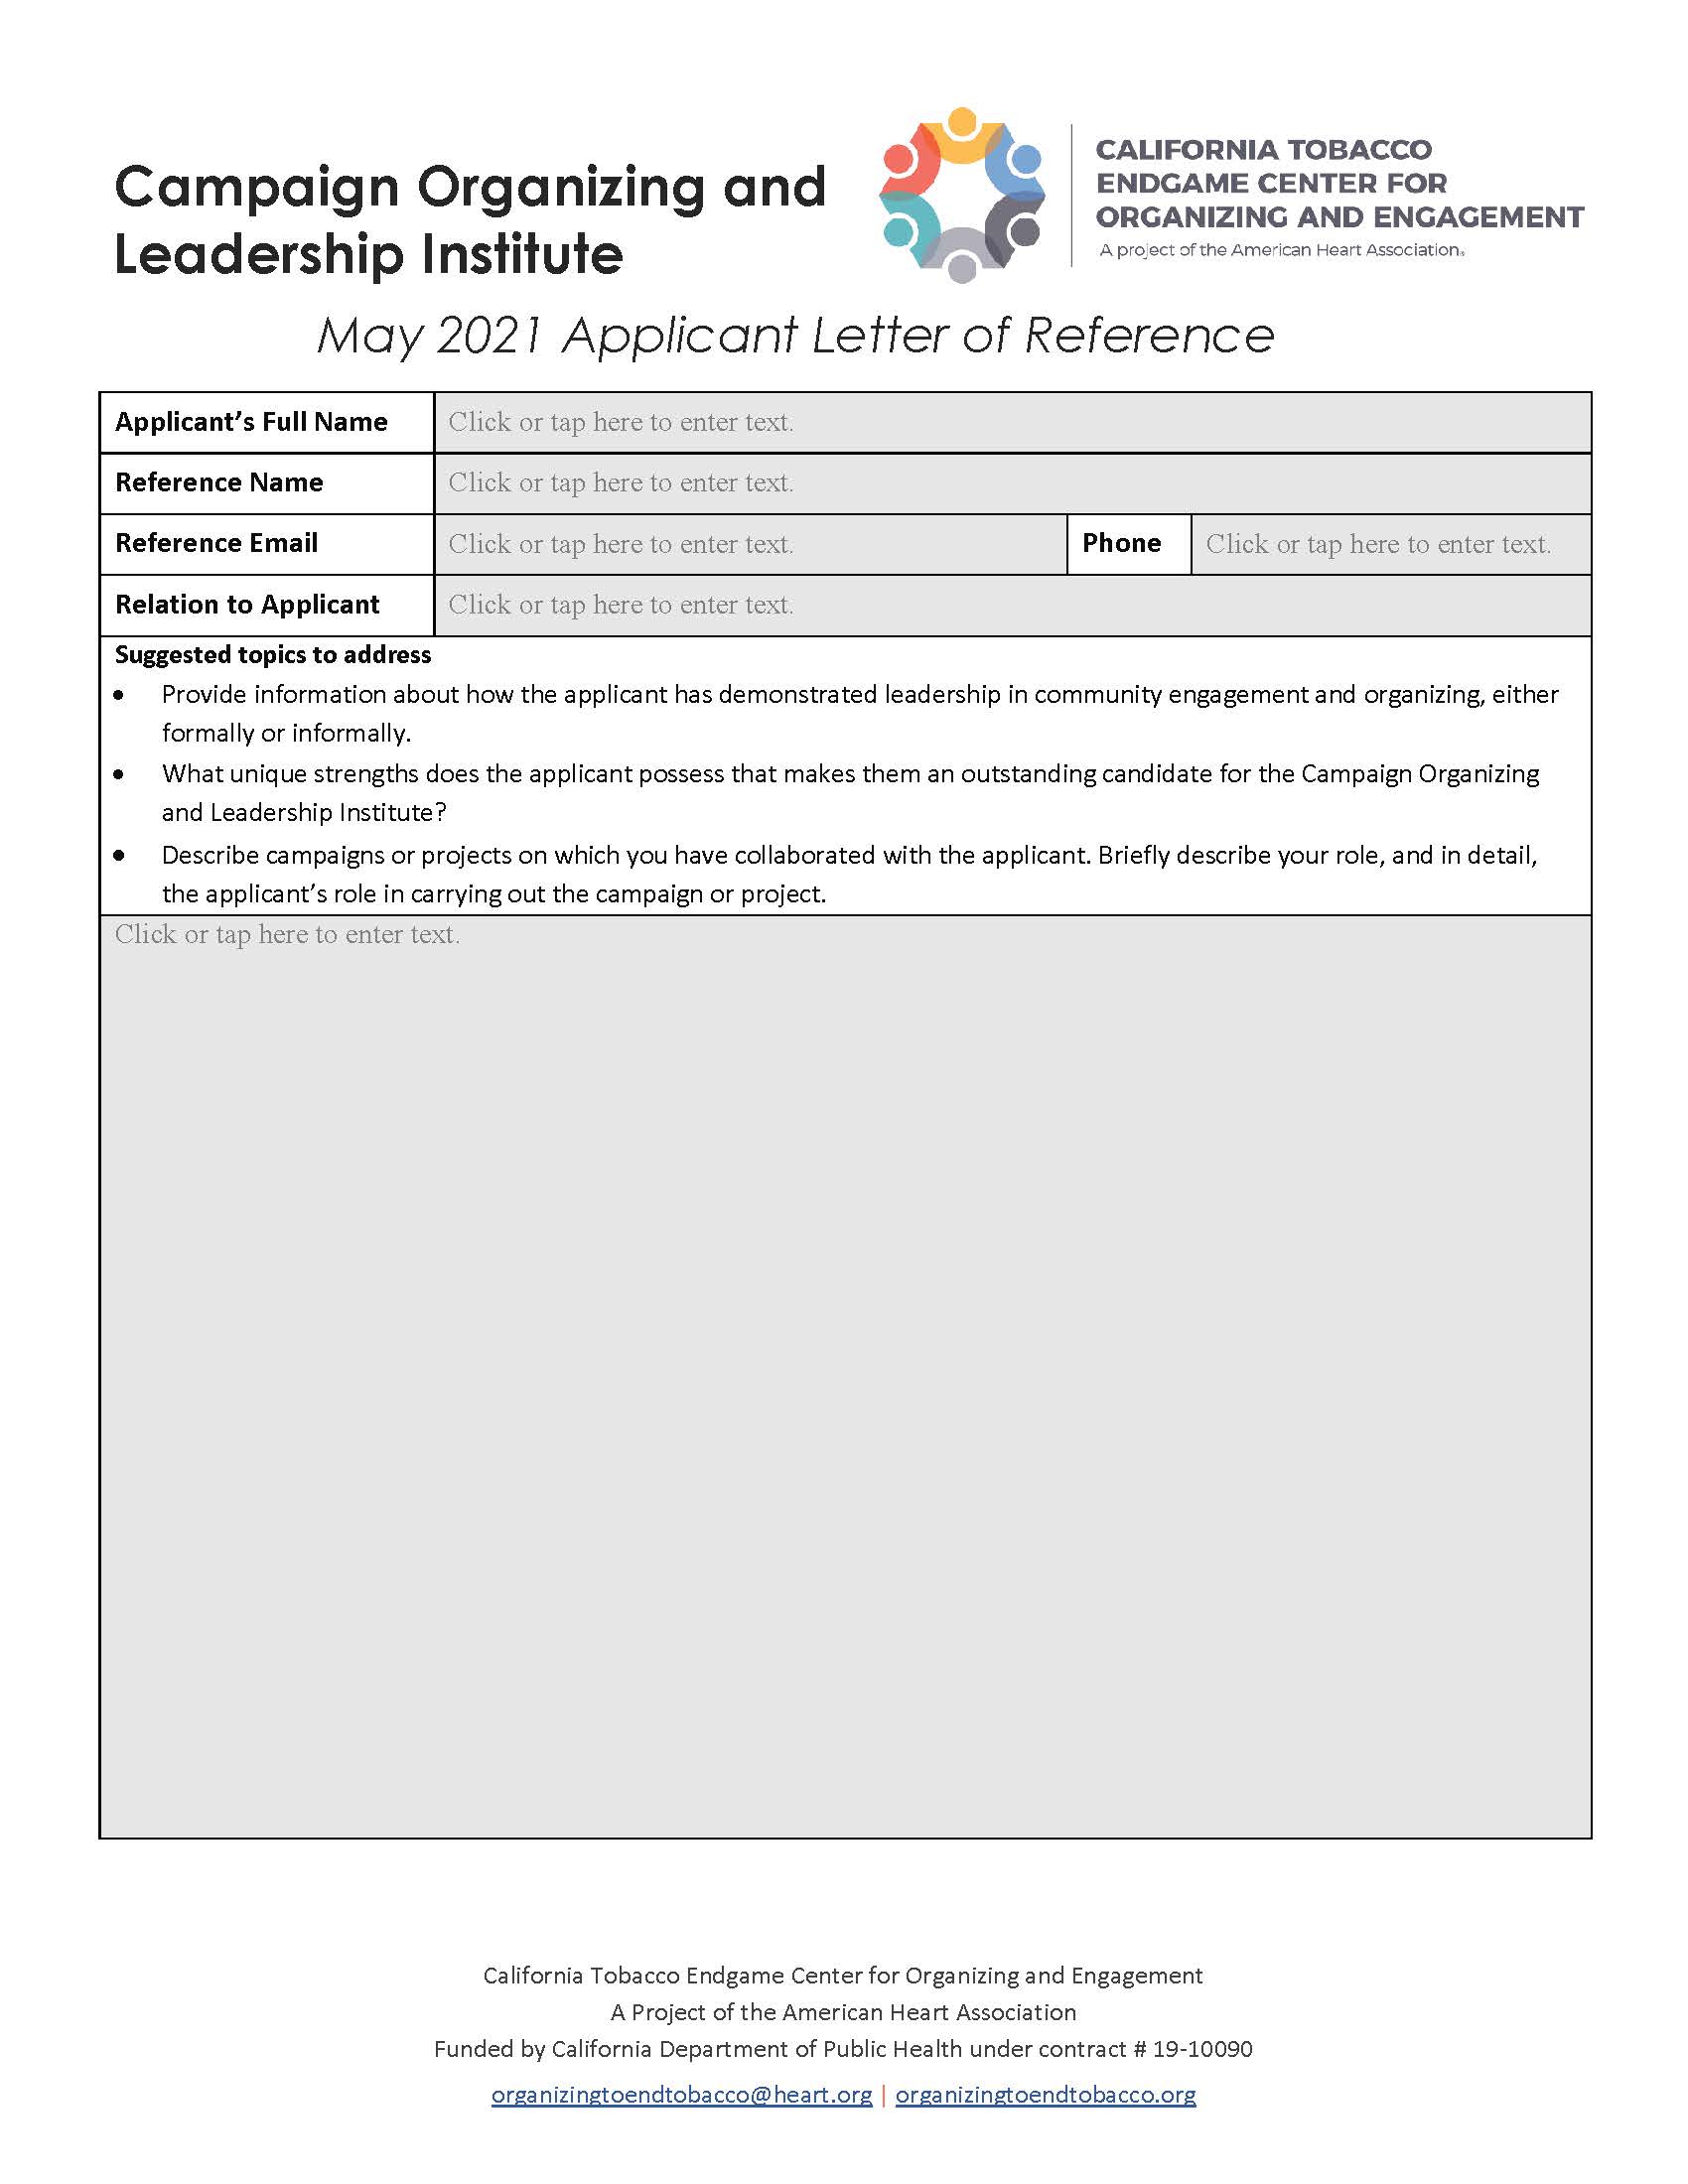 Campaign Organizing and Leadership Institute May 2021 Application Letter of Reference Form